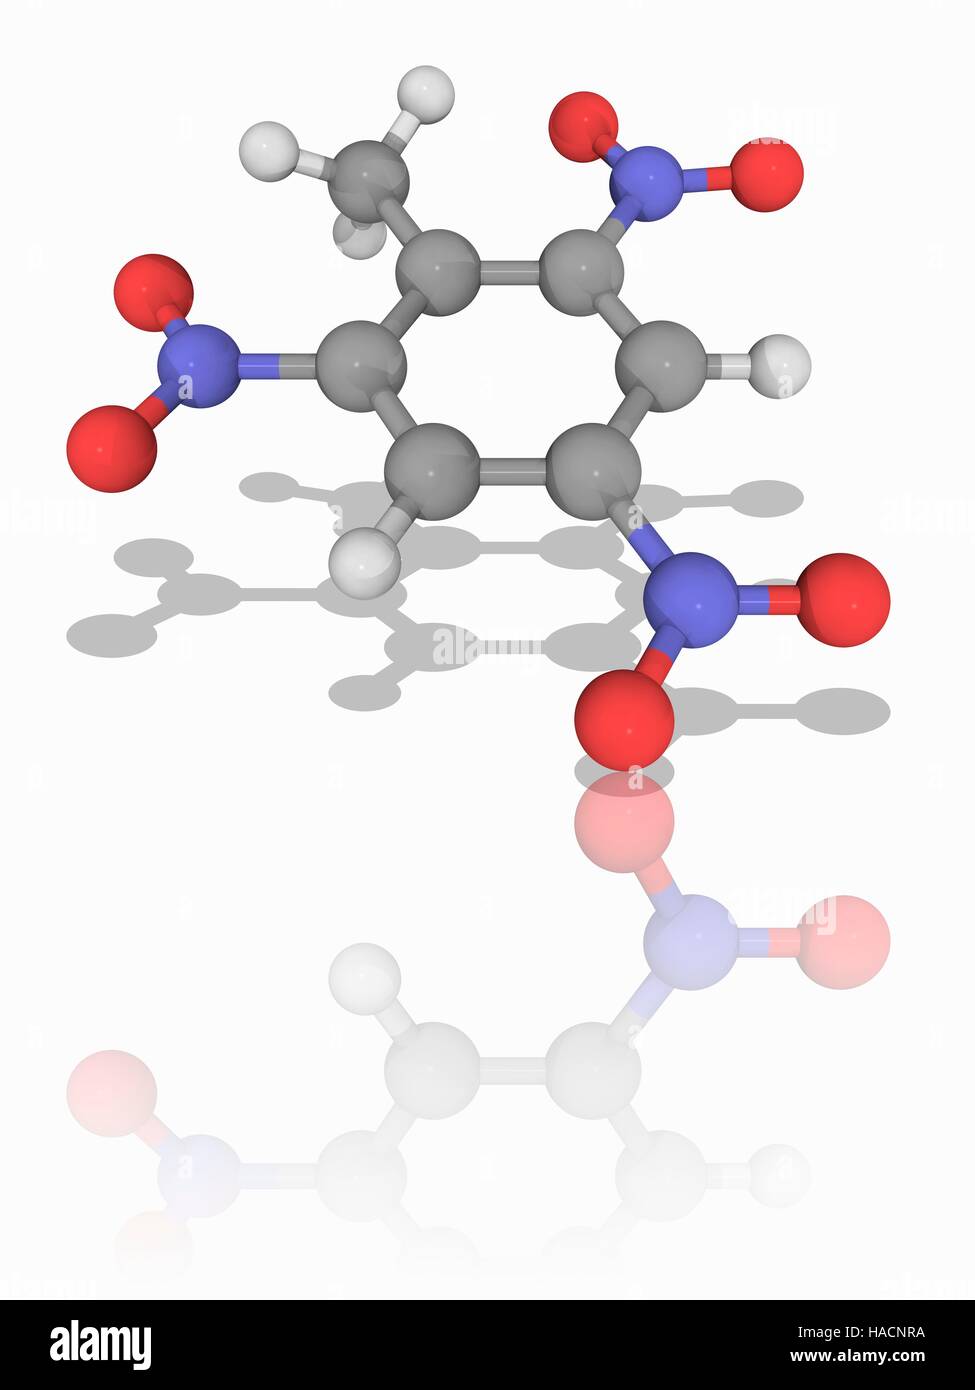 TNT. Molecular model of the organic compound and explosive trinitrotoluene (TNT, C7.H5.N3.O6). This is one of the most commonly used explosives. Atoms are represented as spheres and are colour-coded: carbon (grey), hydrogen (white), nitrogen (blue) and oxygen (red). Illustration. Stock Photo